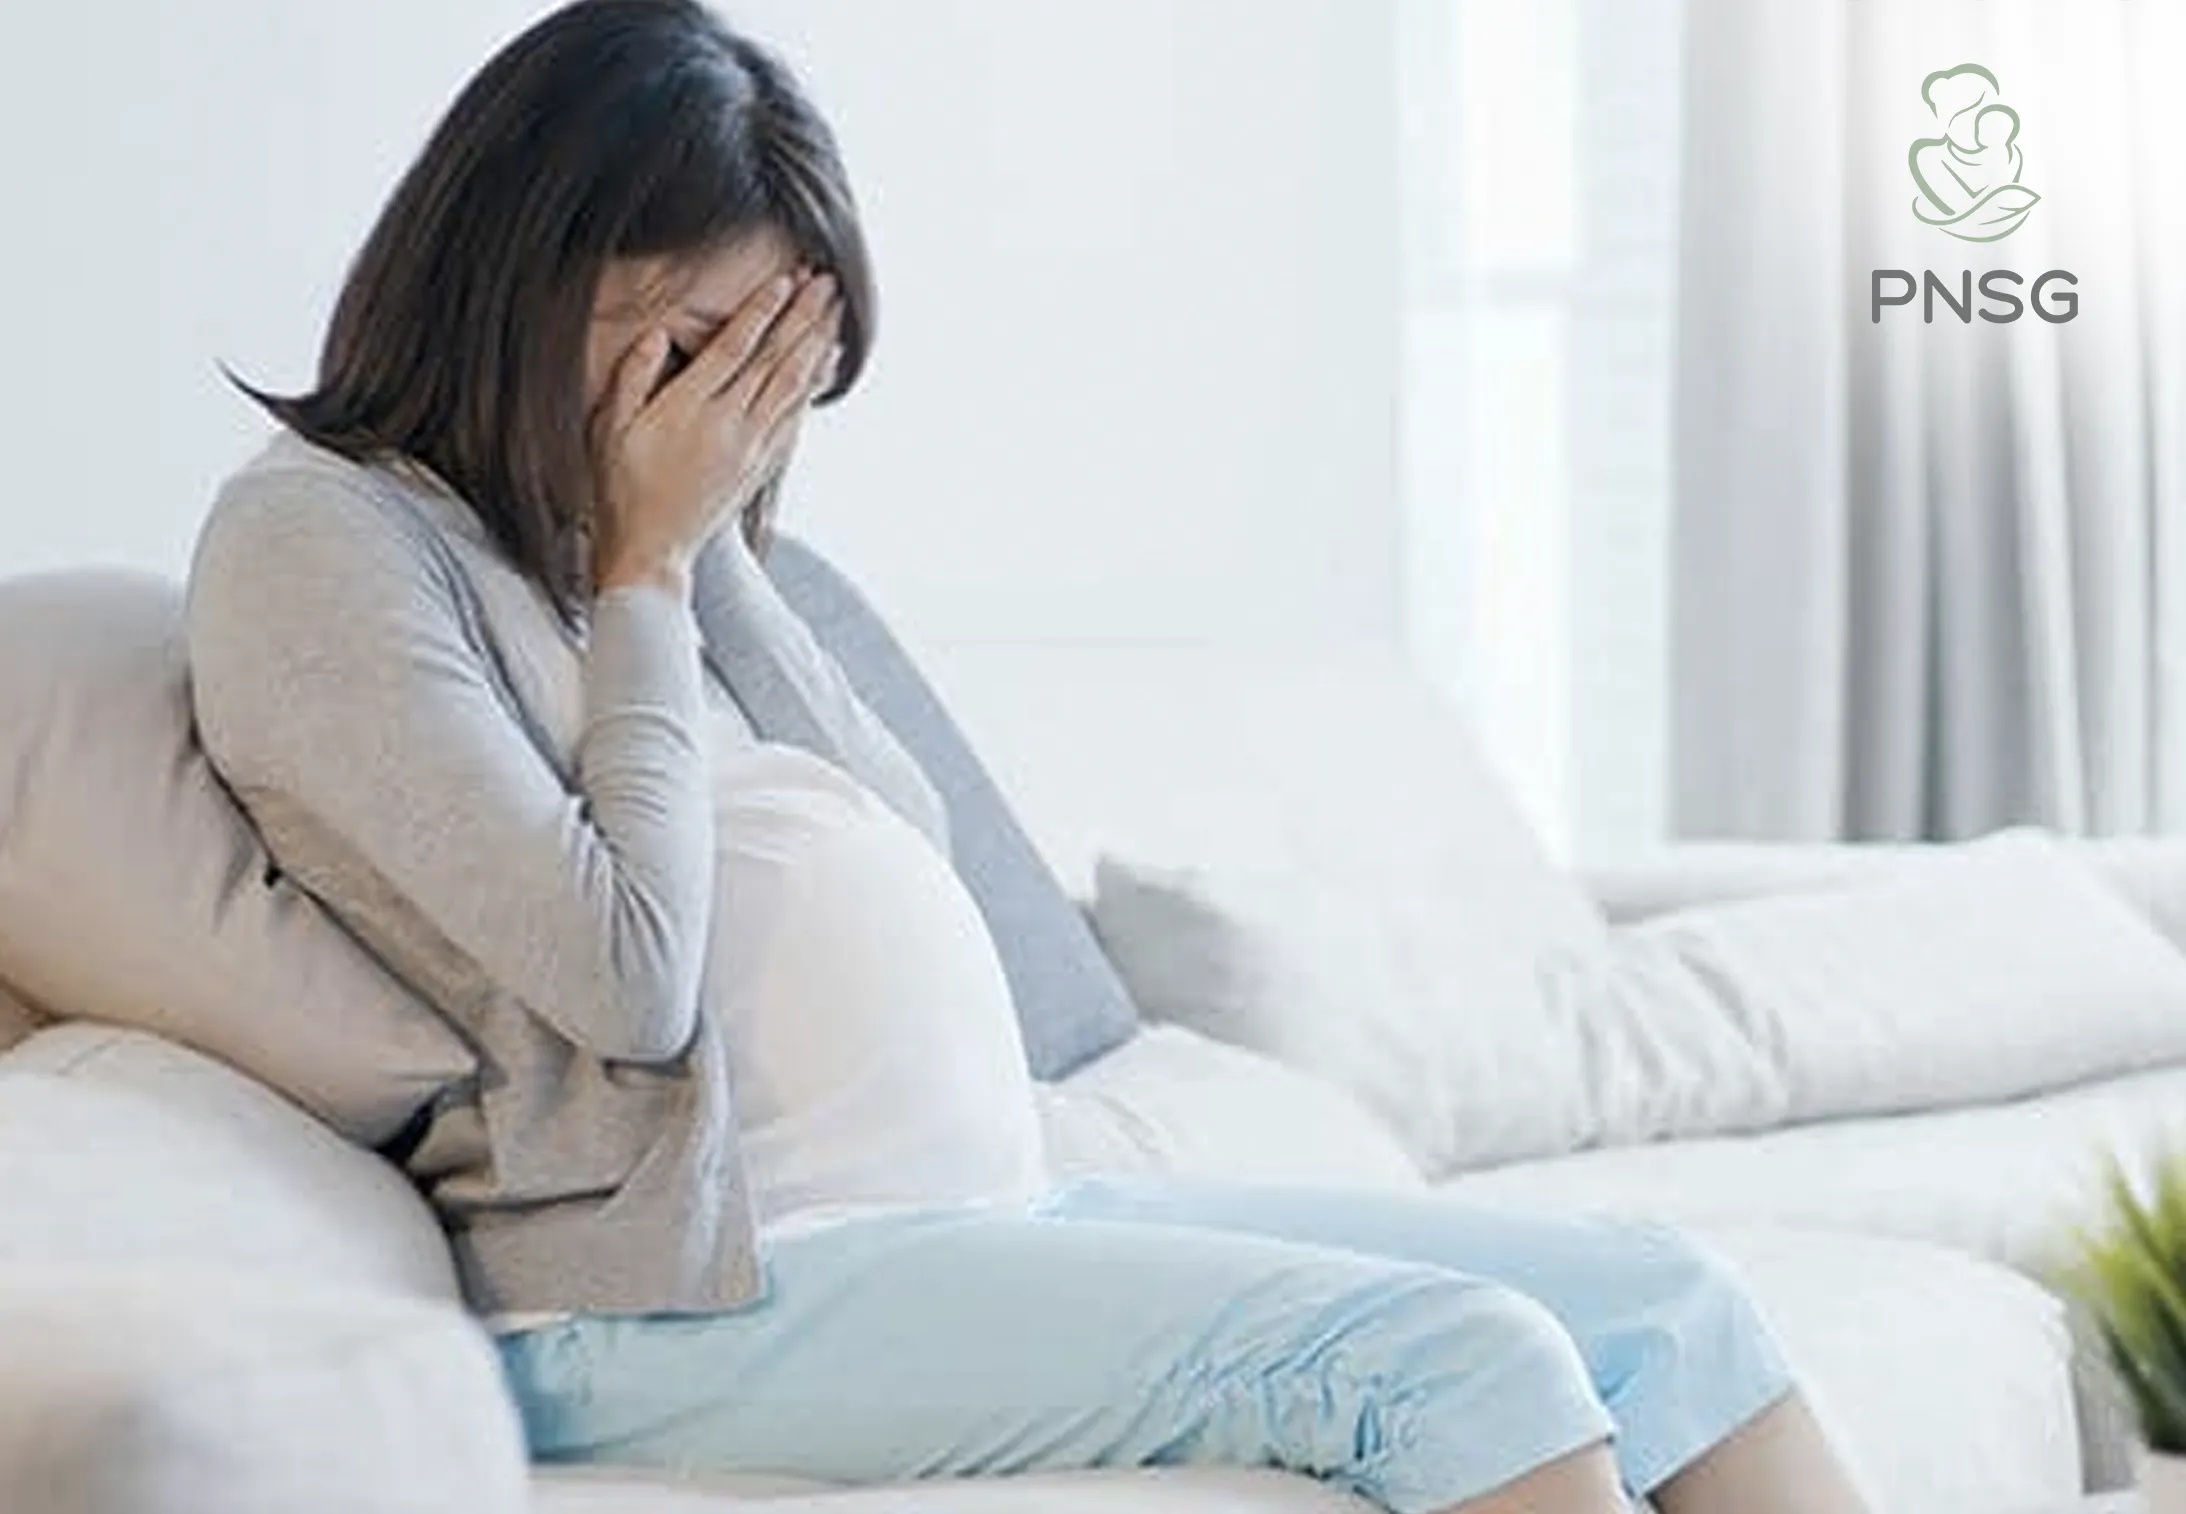 How You Can Overcome Pregnancy Stress In Healthy Ways - PNSG